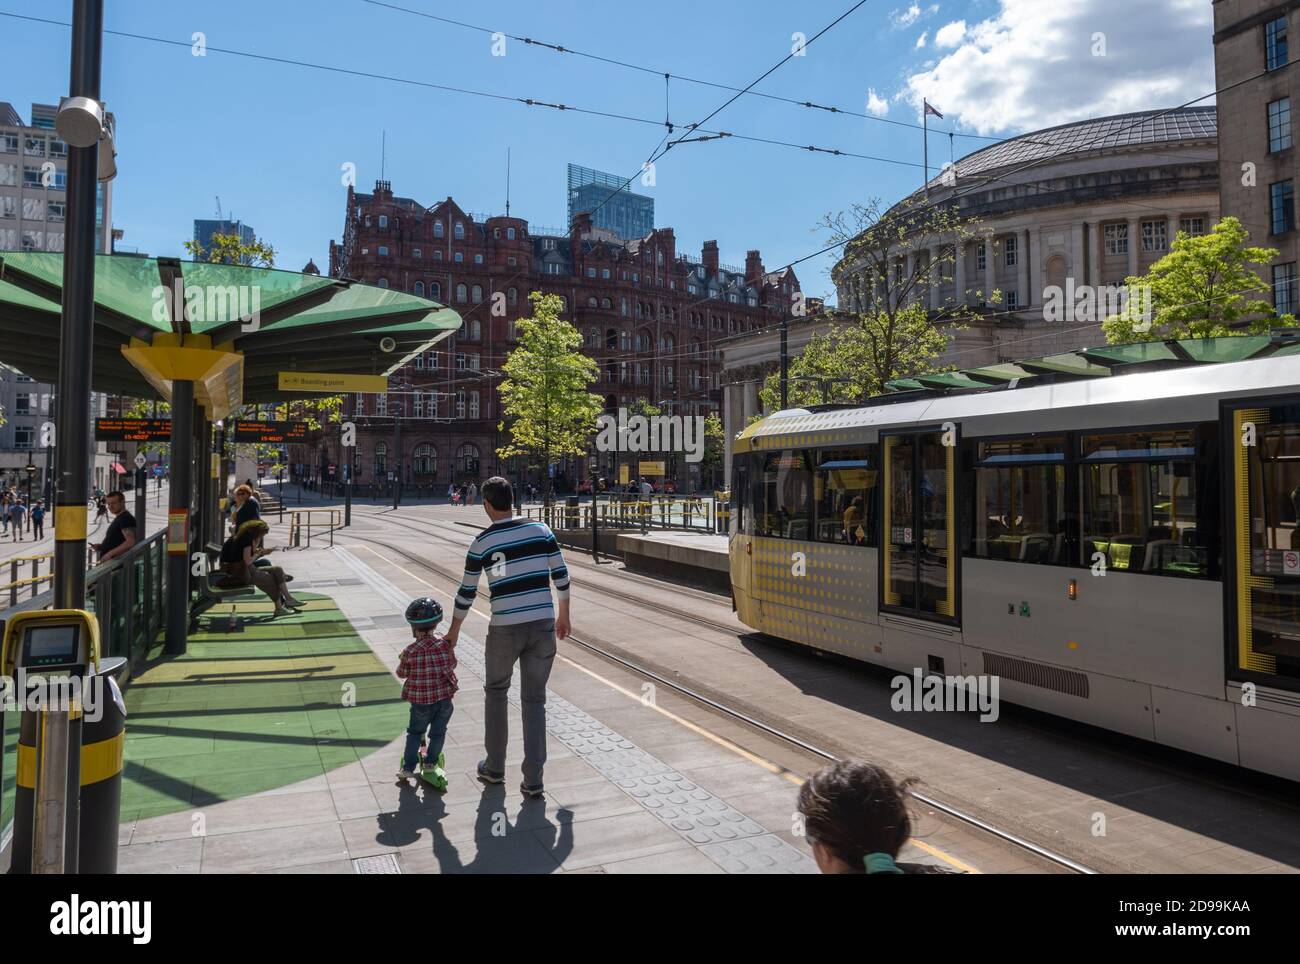 St Peter’s Square tram stop, Manchester Stock Photo